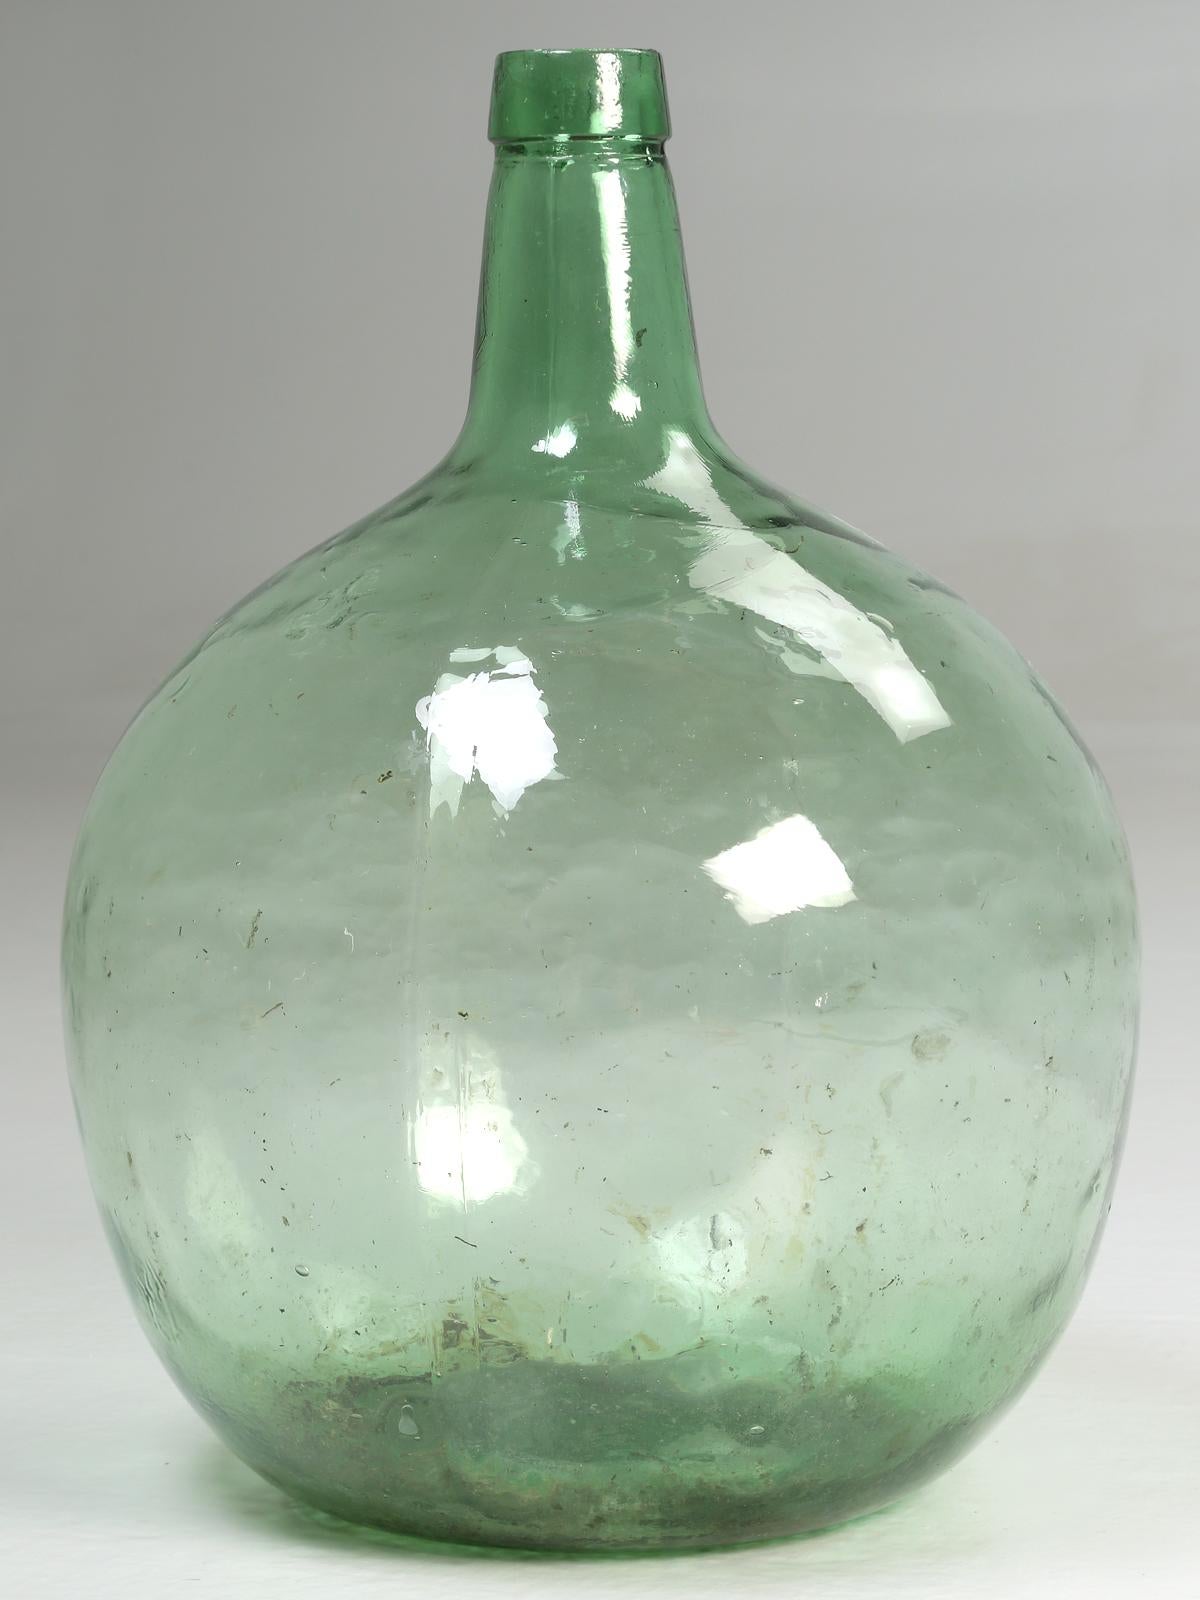 Country Antique French Demijohn or Carboy